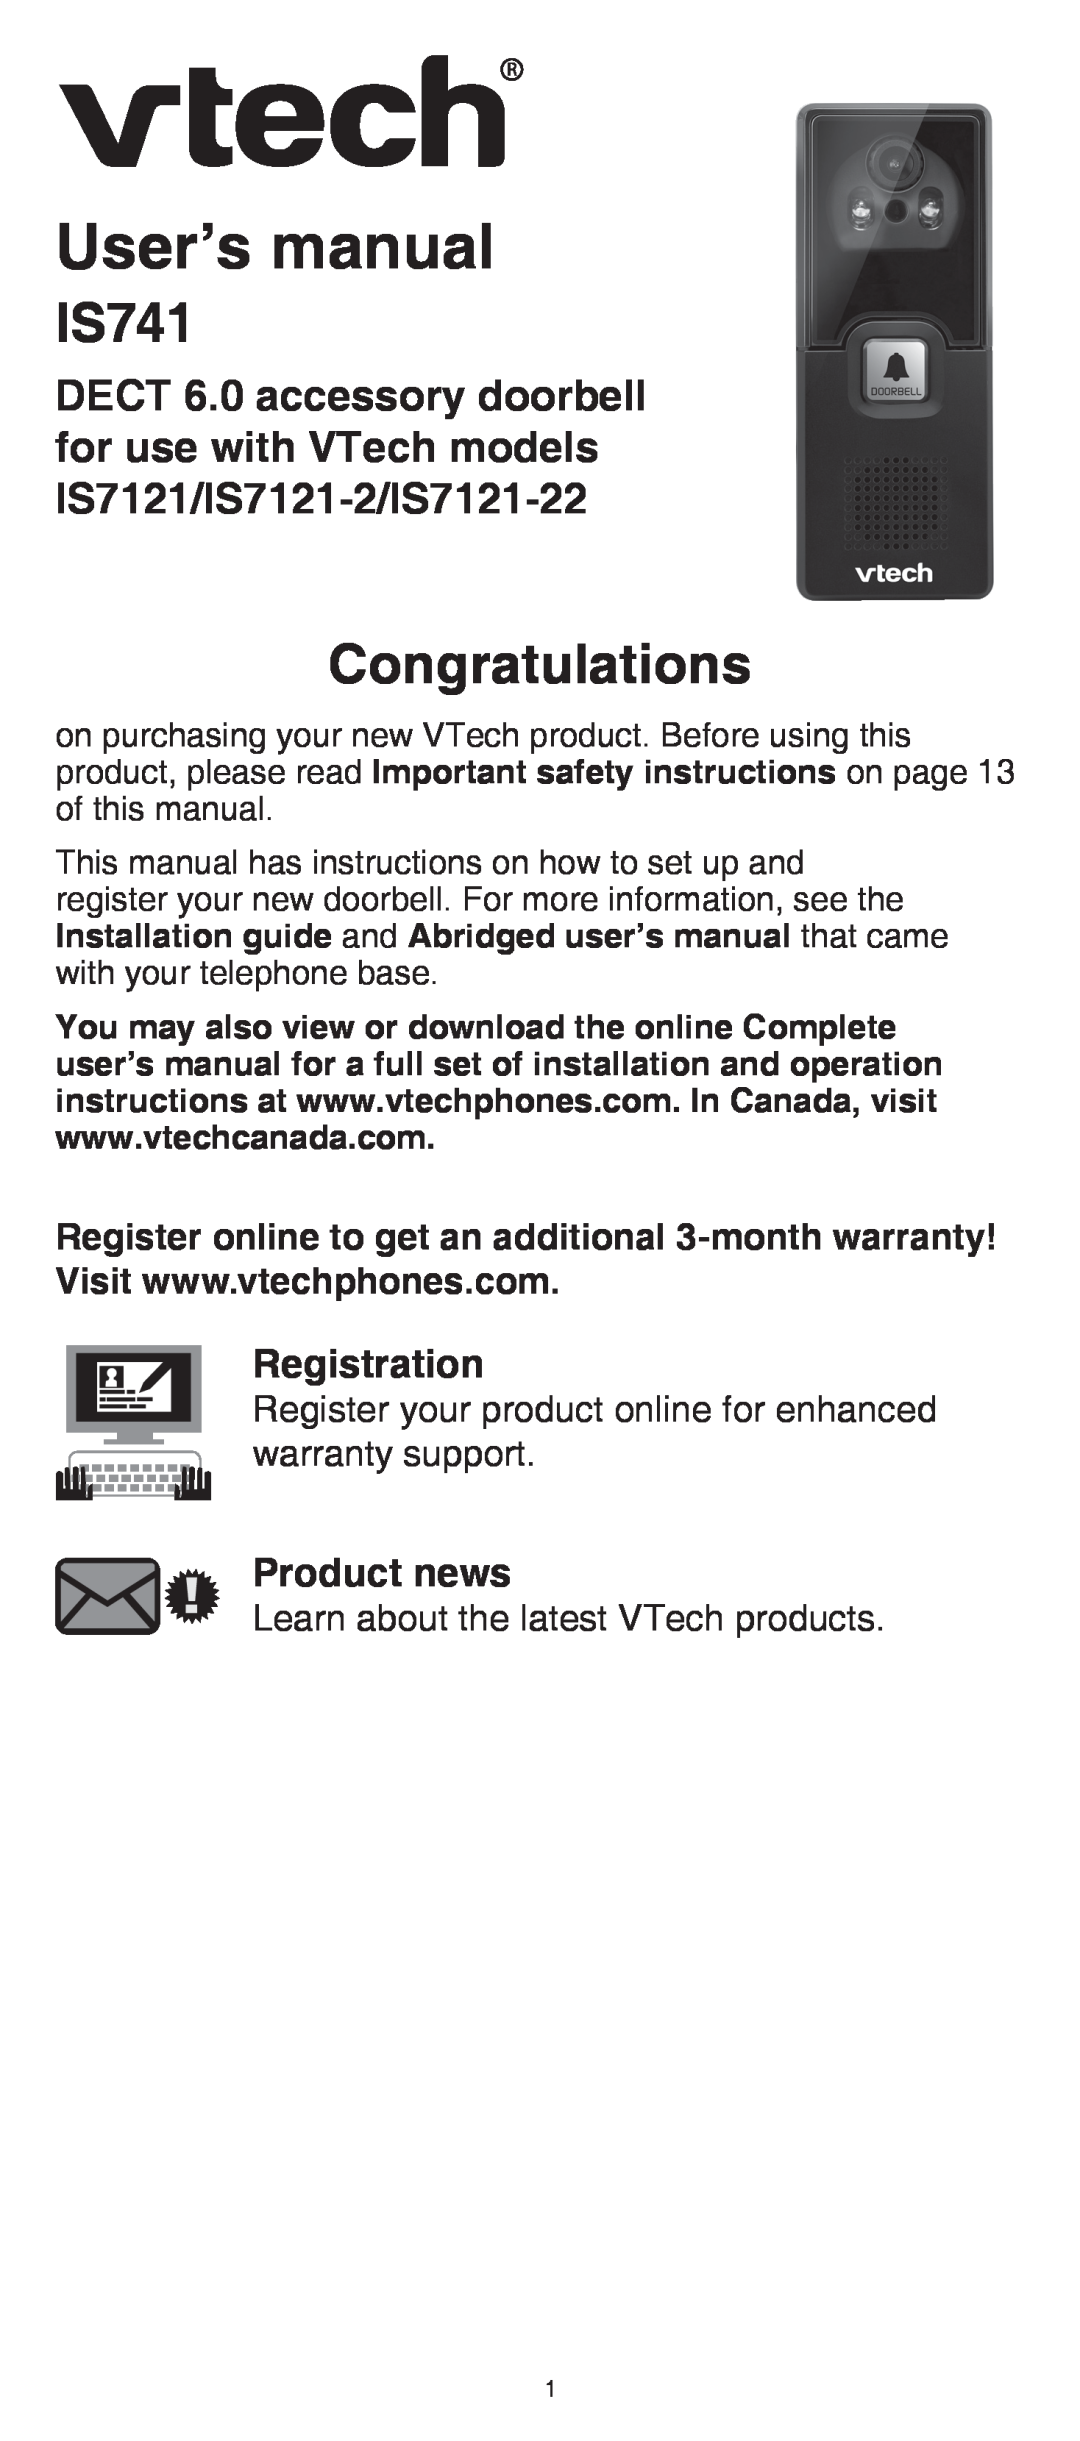 VTech IS7121/IS7121-2/IS7121-22 user manual IS741, Congratulations, Registration, Product news 